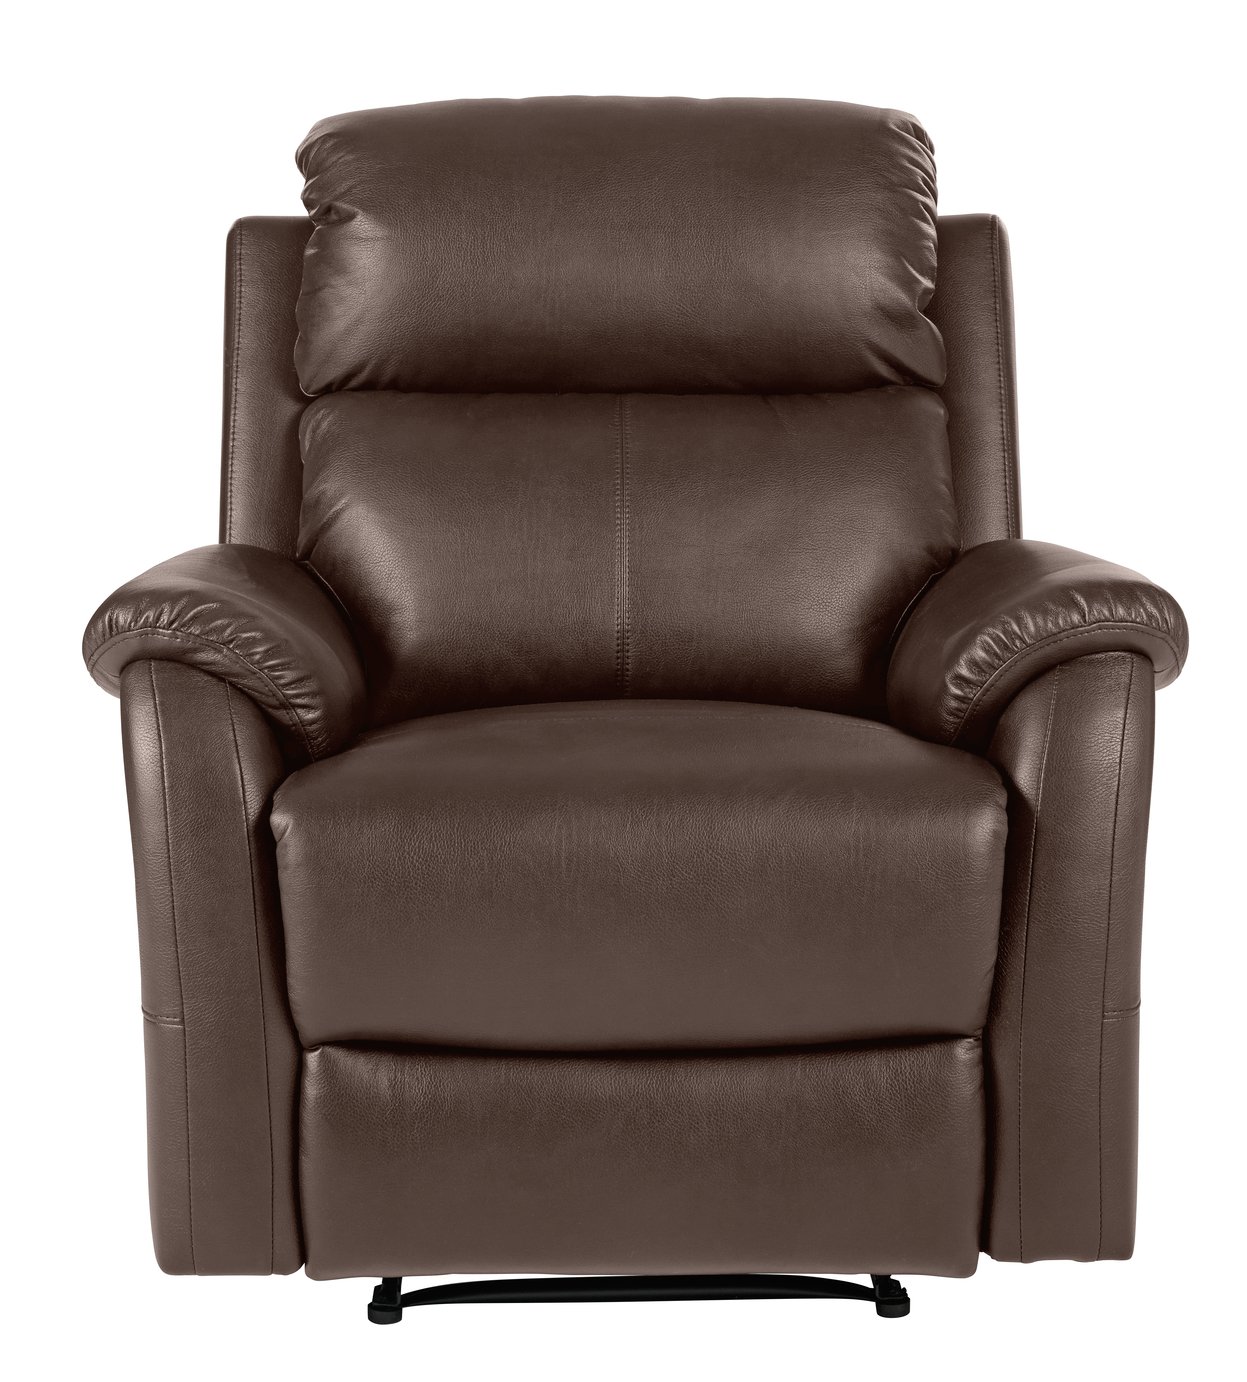 Argos Home Tyler Leather Manual Recliner Chair Reviews